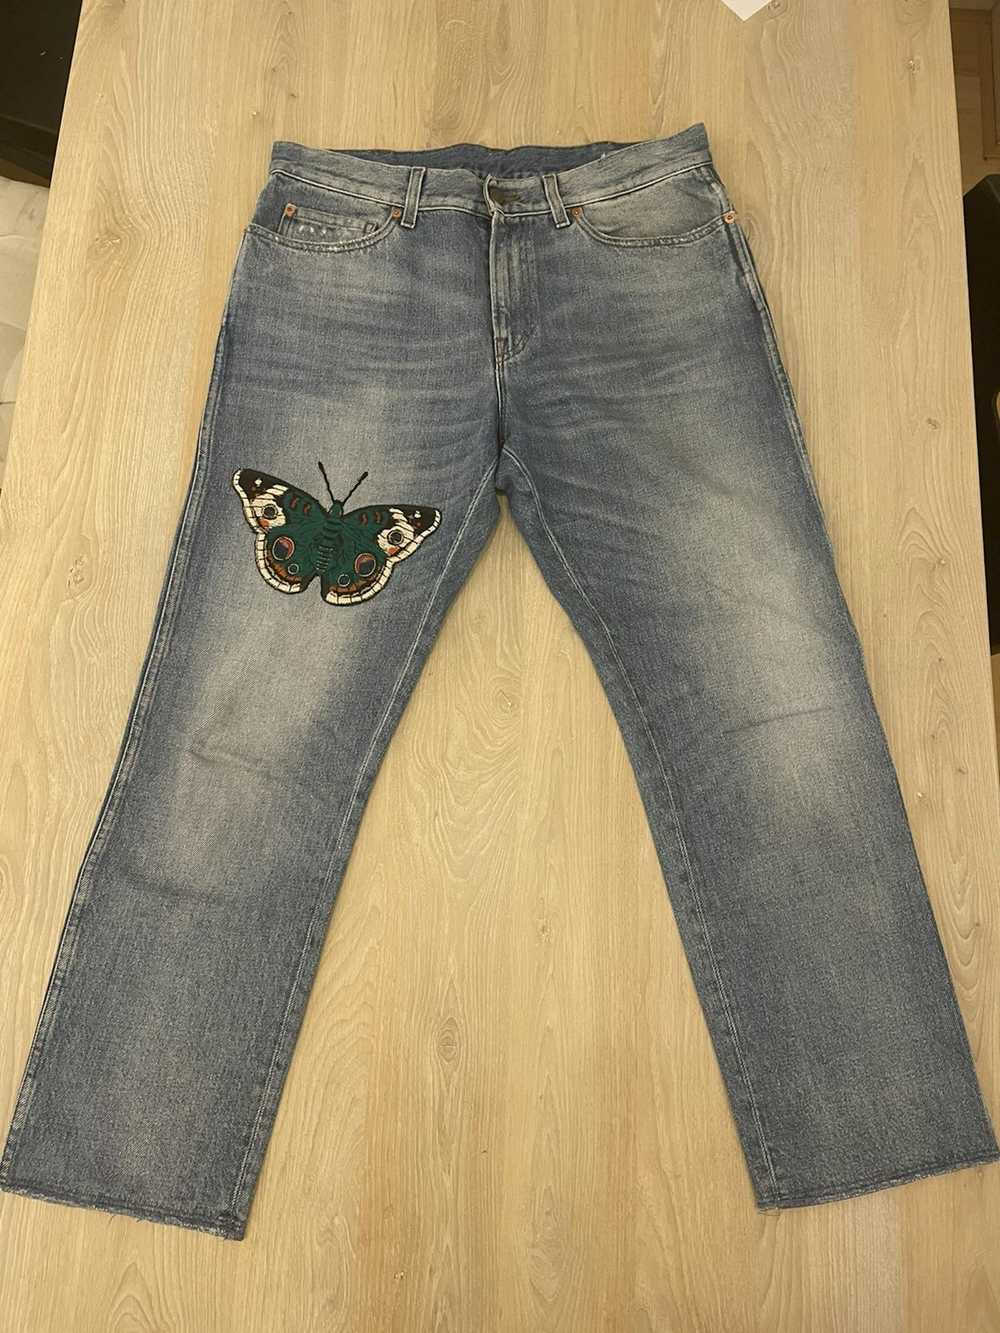 Gucci Butterfly Embroidered Jeans - image 1